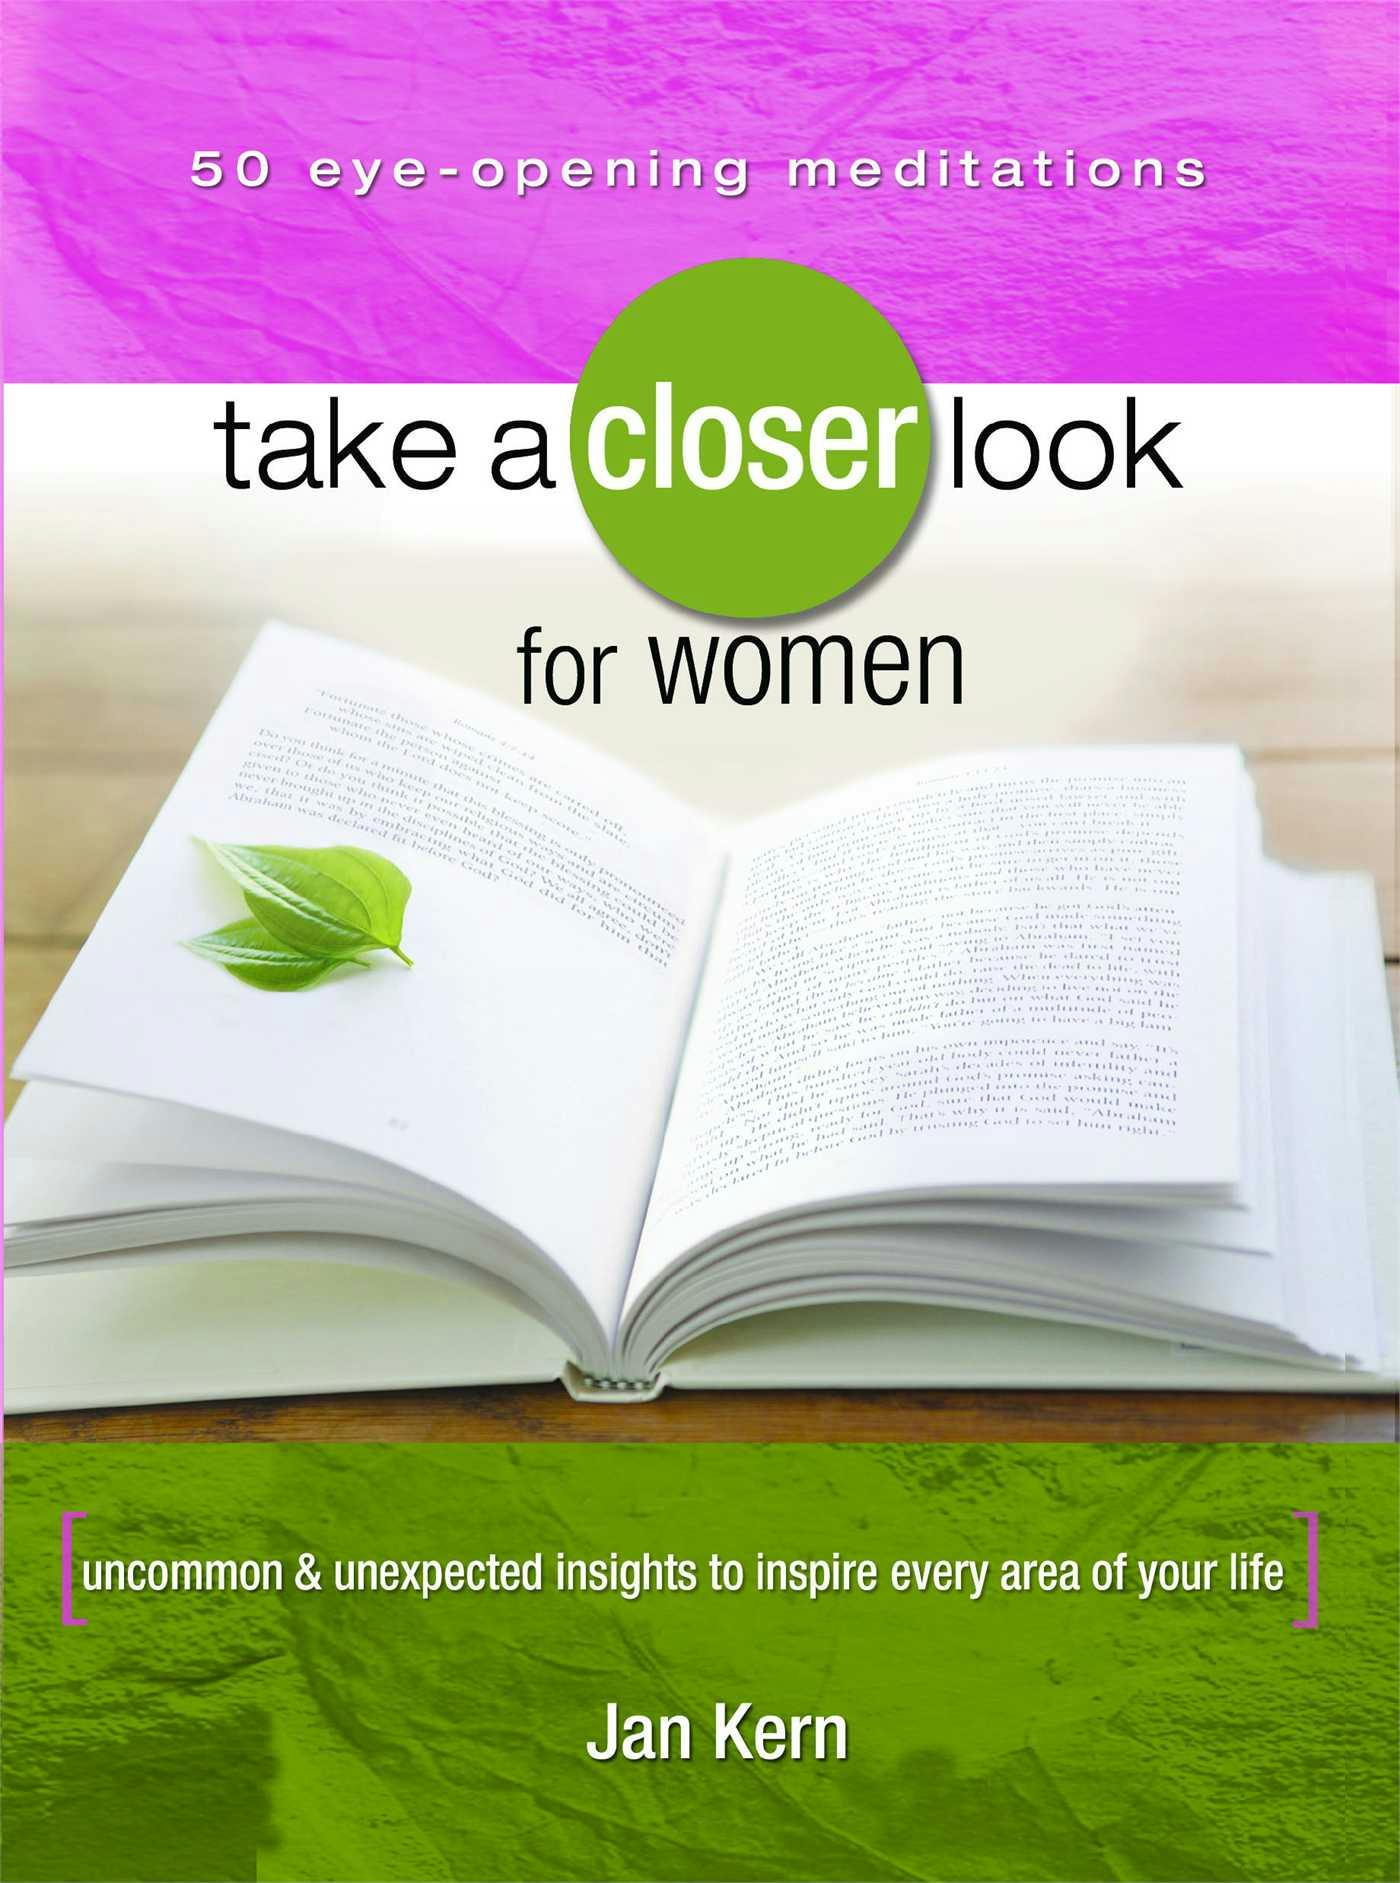 Take a Closer Look for Women: Uncommon & Unexpected Insights to Inspire Every Area of Your Life - Jan Kern